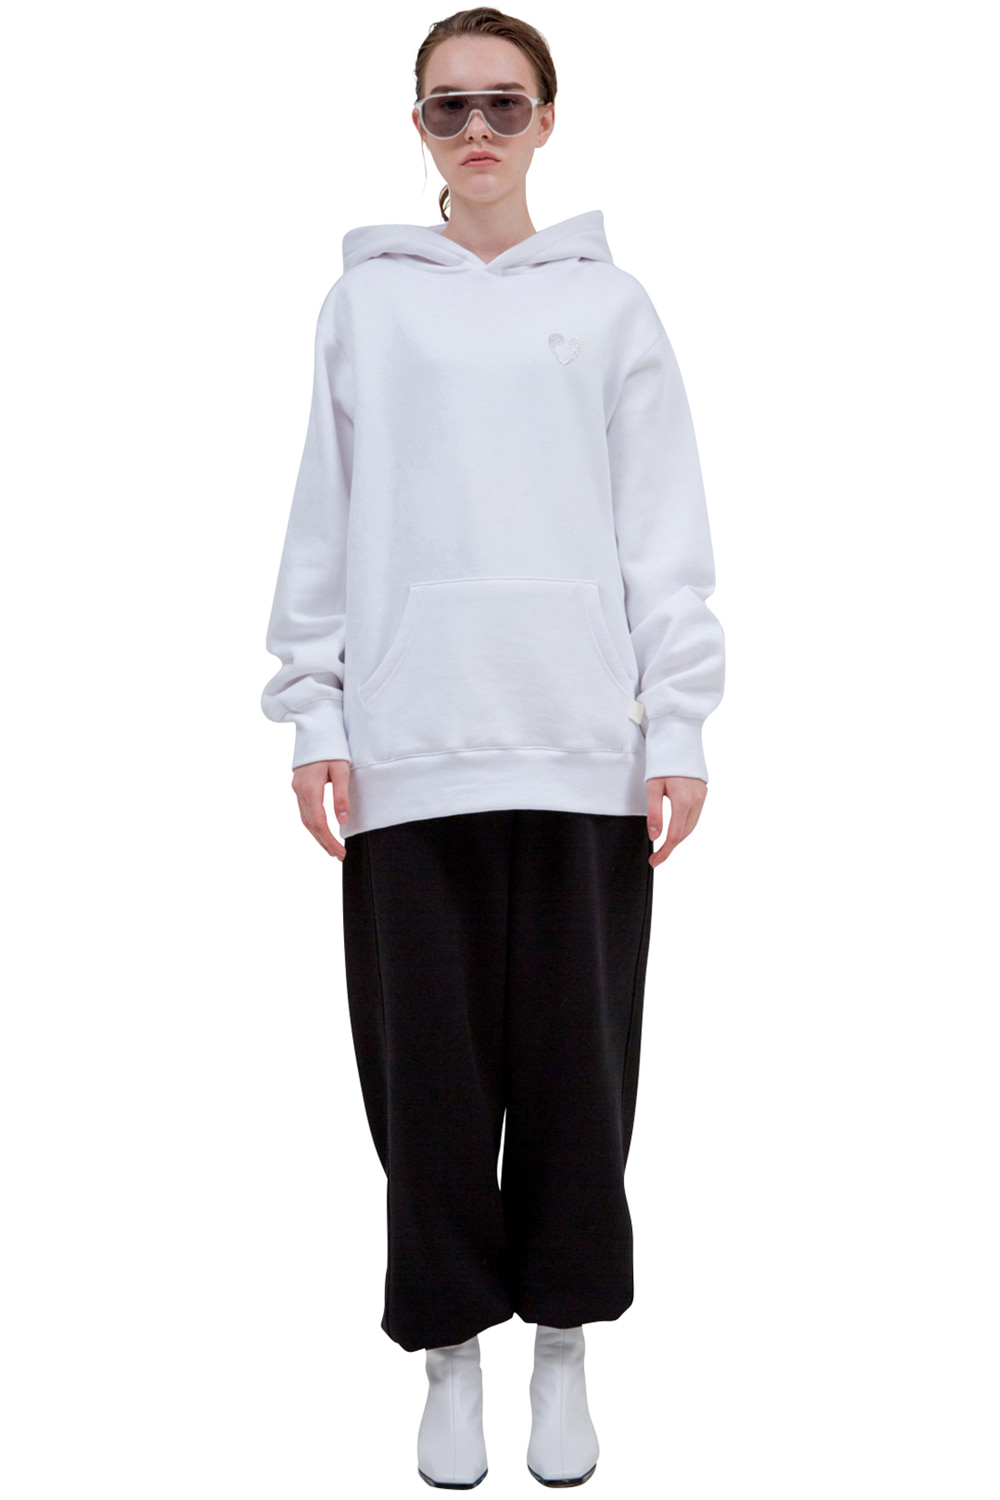 WHITE EMBELLISHED COMMA HOODIE